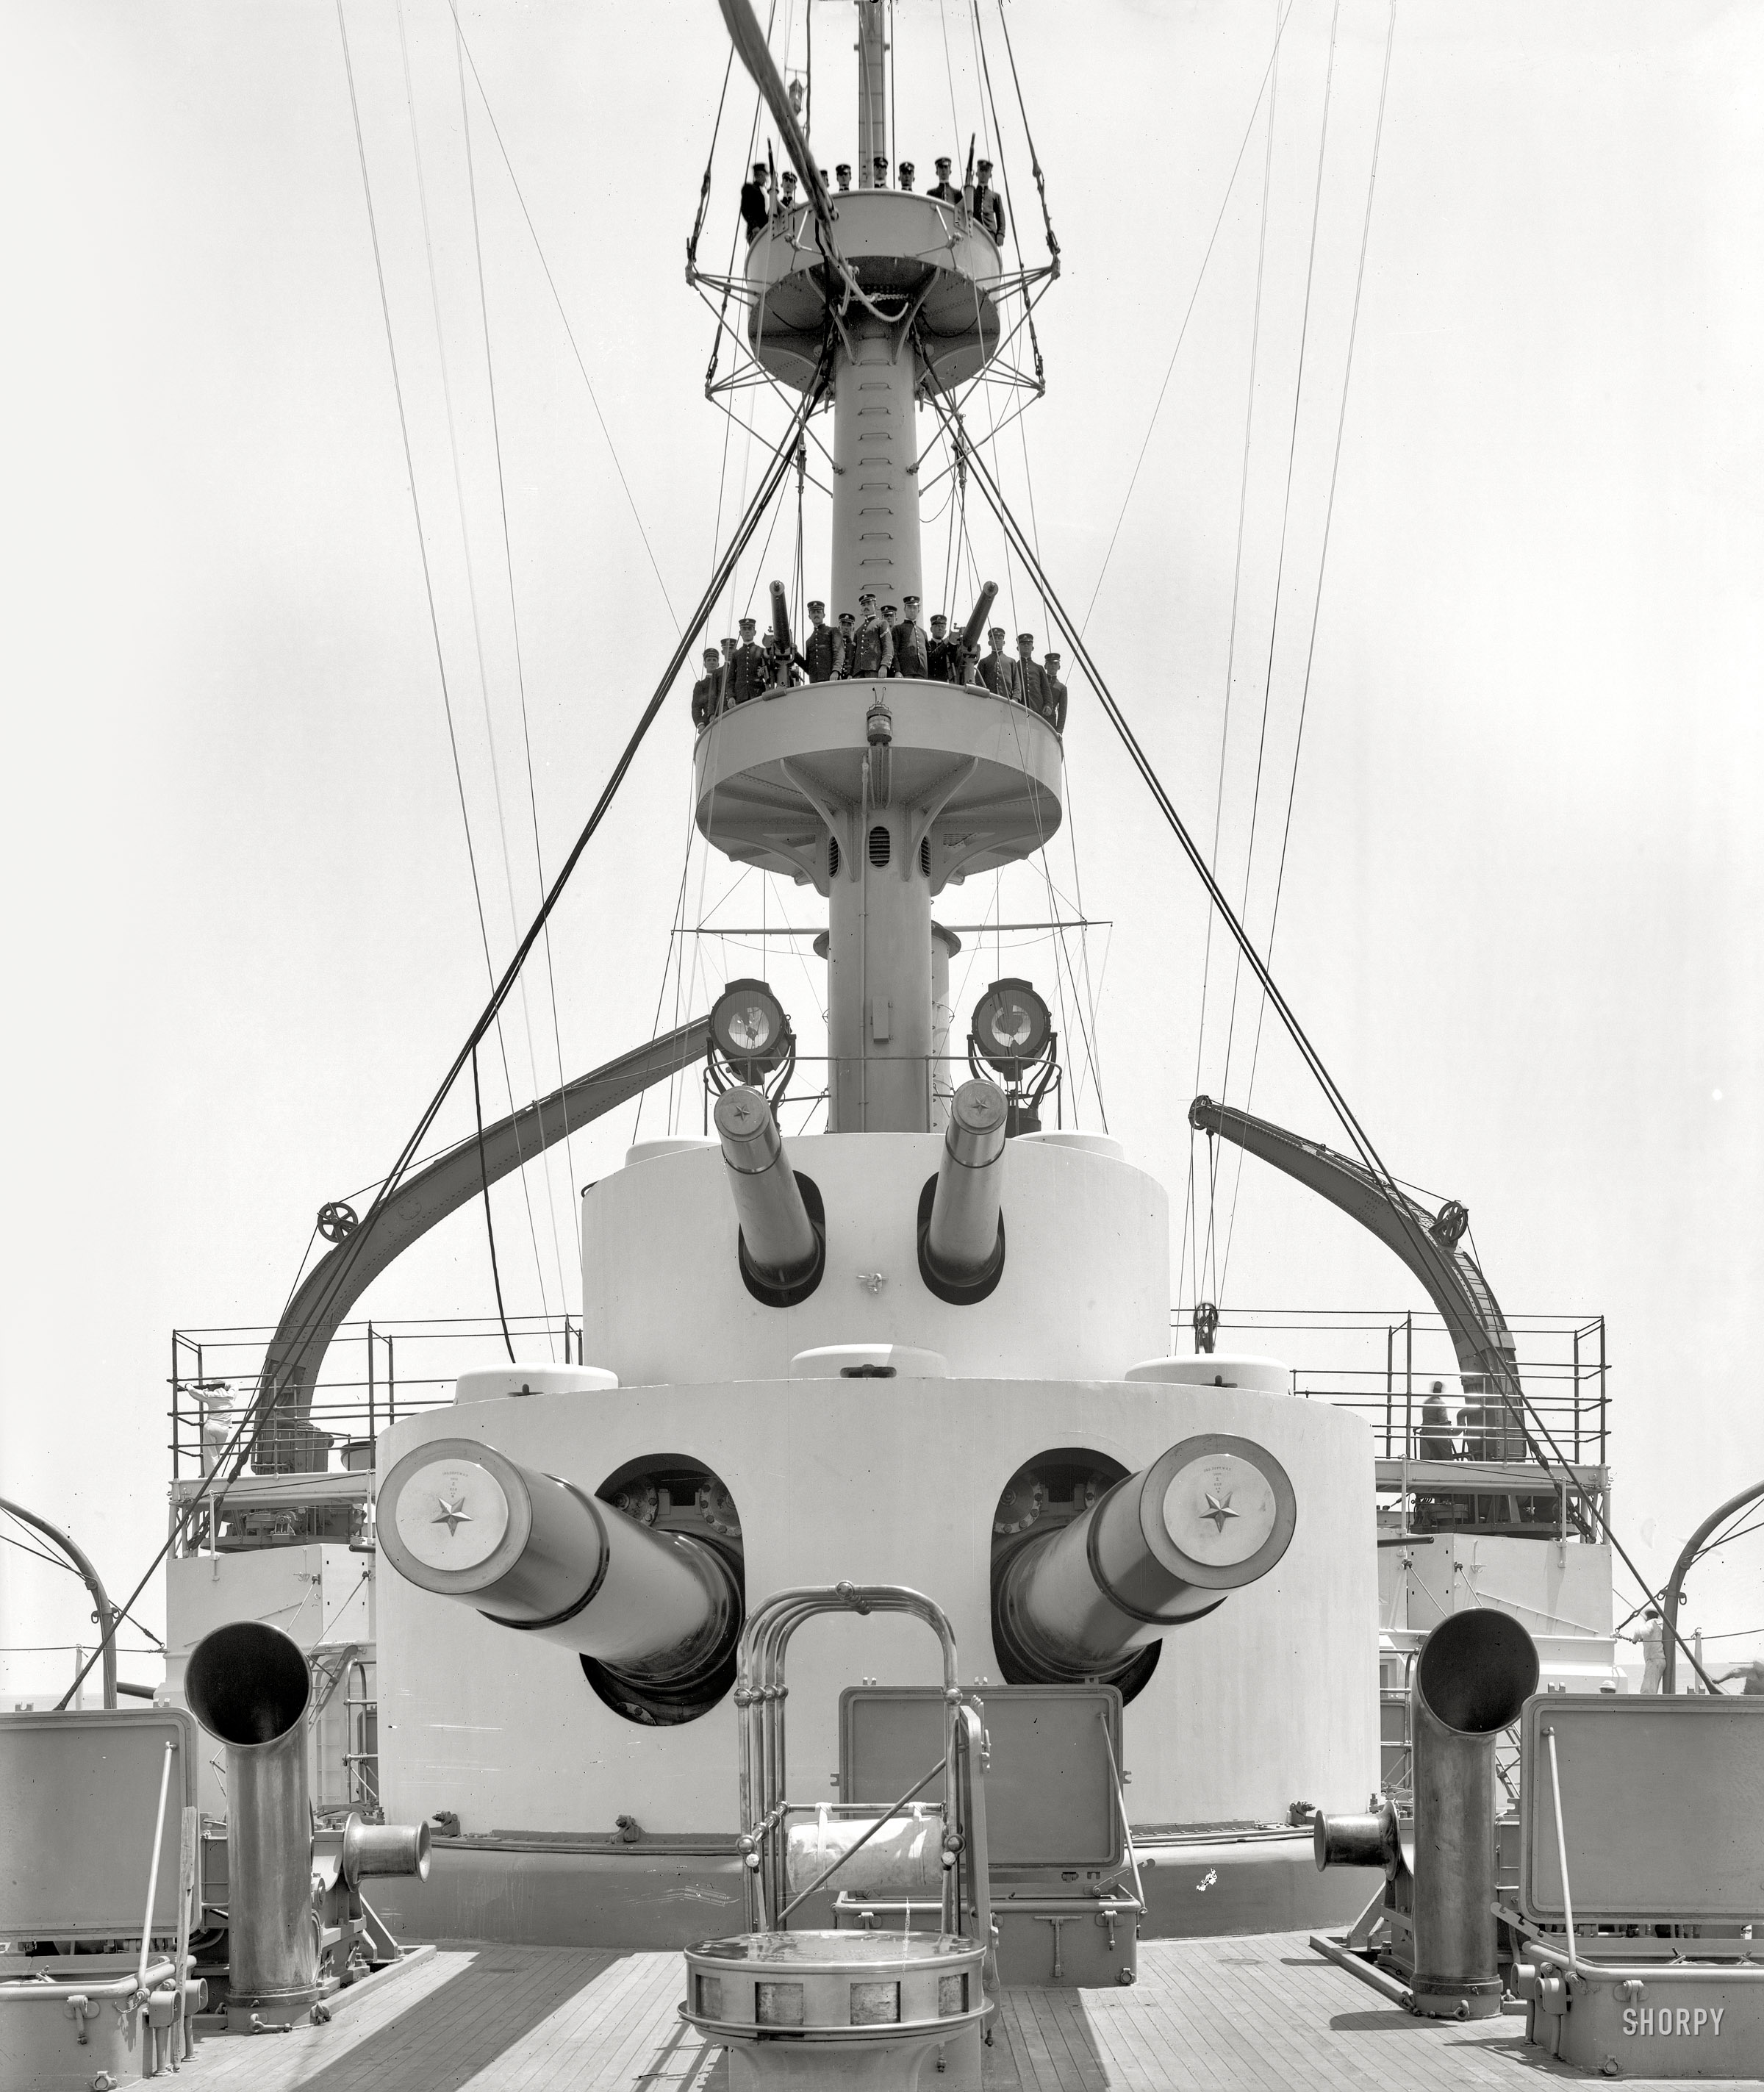 Circa 1900. "U.S.S. Kentucky -- quarter deck and after gun turrets." 8x10 inch glass negative by Edward Hart, Detroit Publishing Company. View full size.